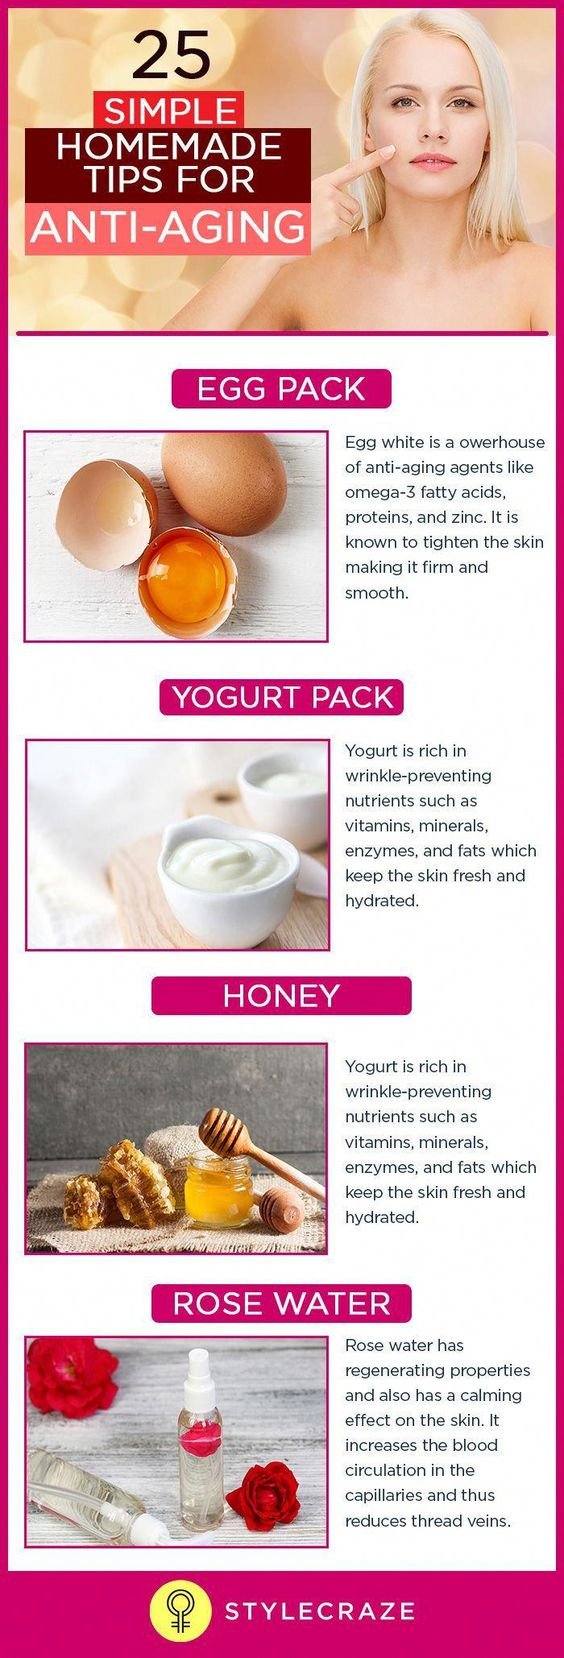 Simple homemade tips for Anti-Aging